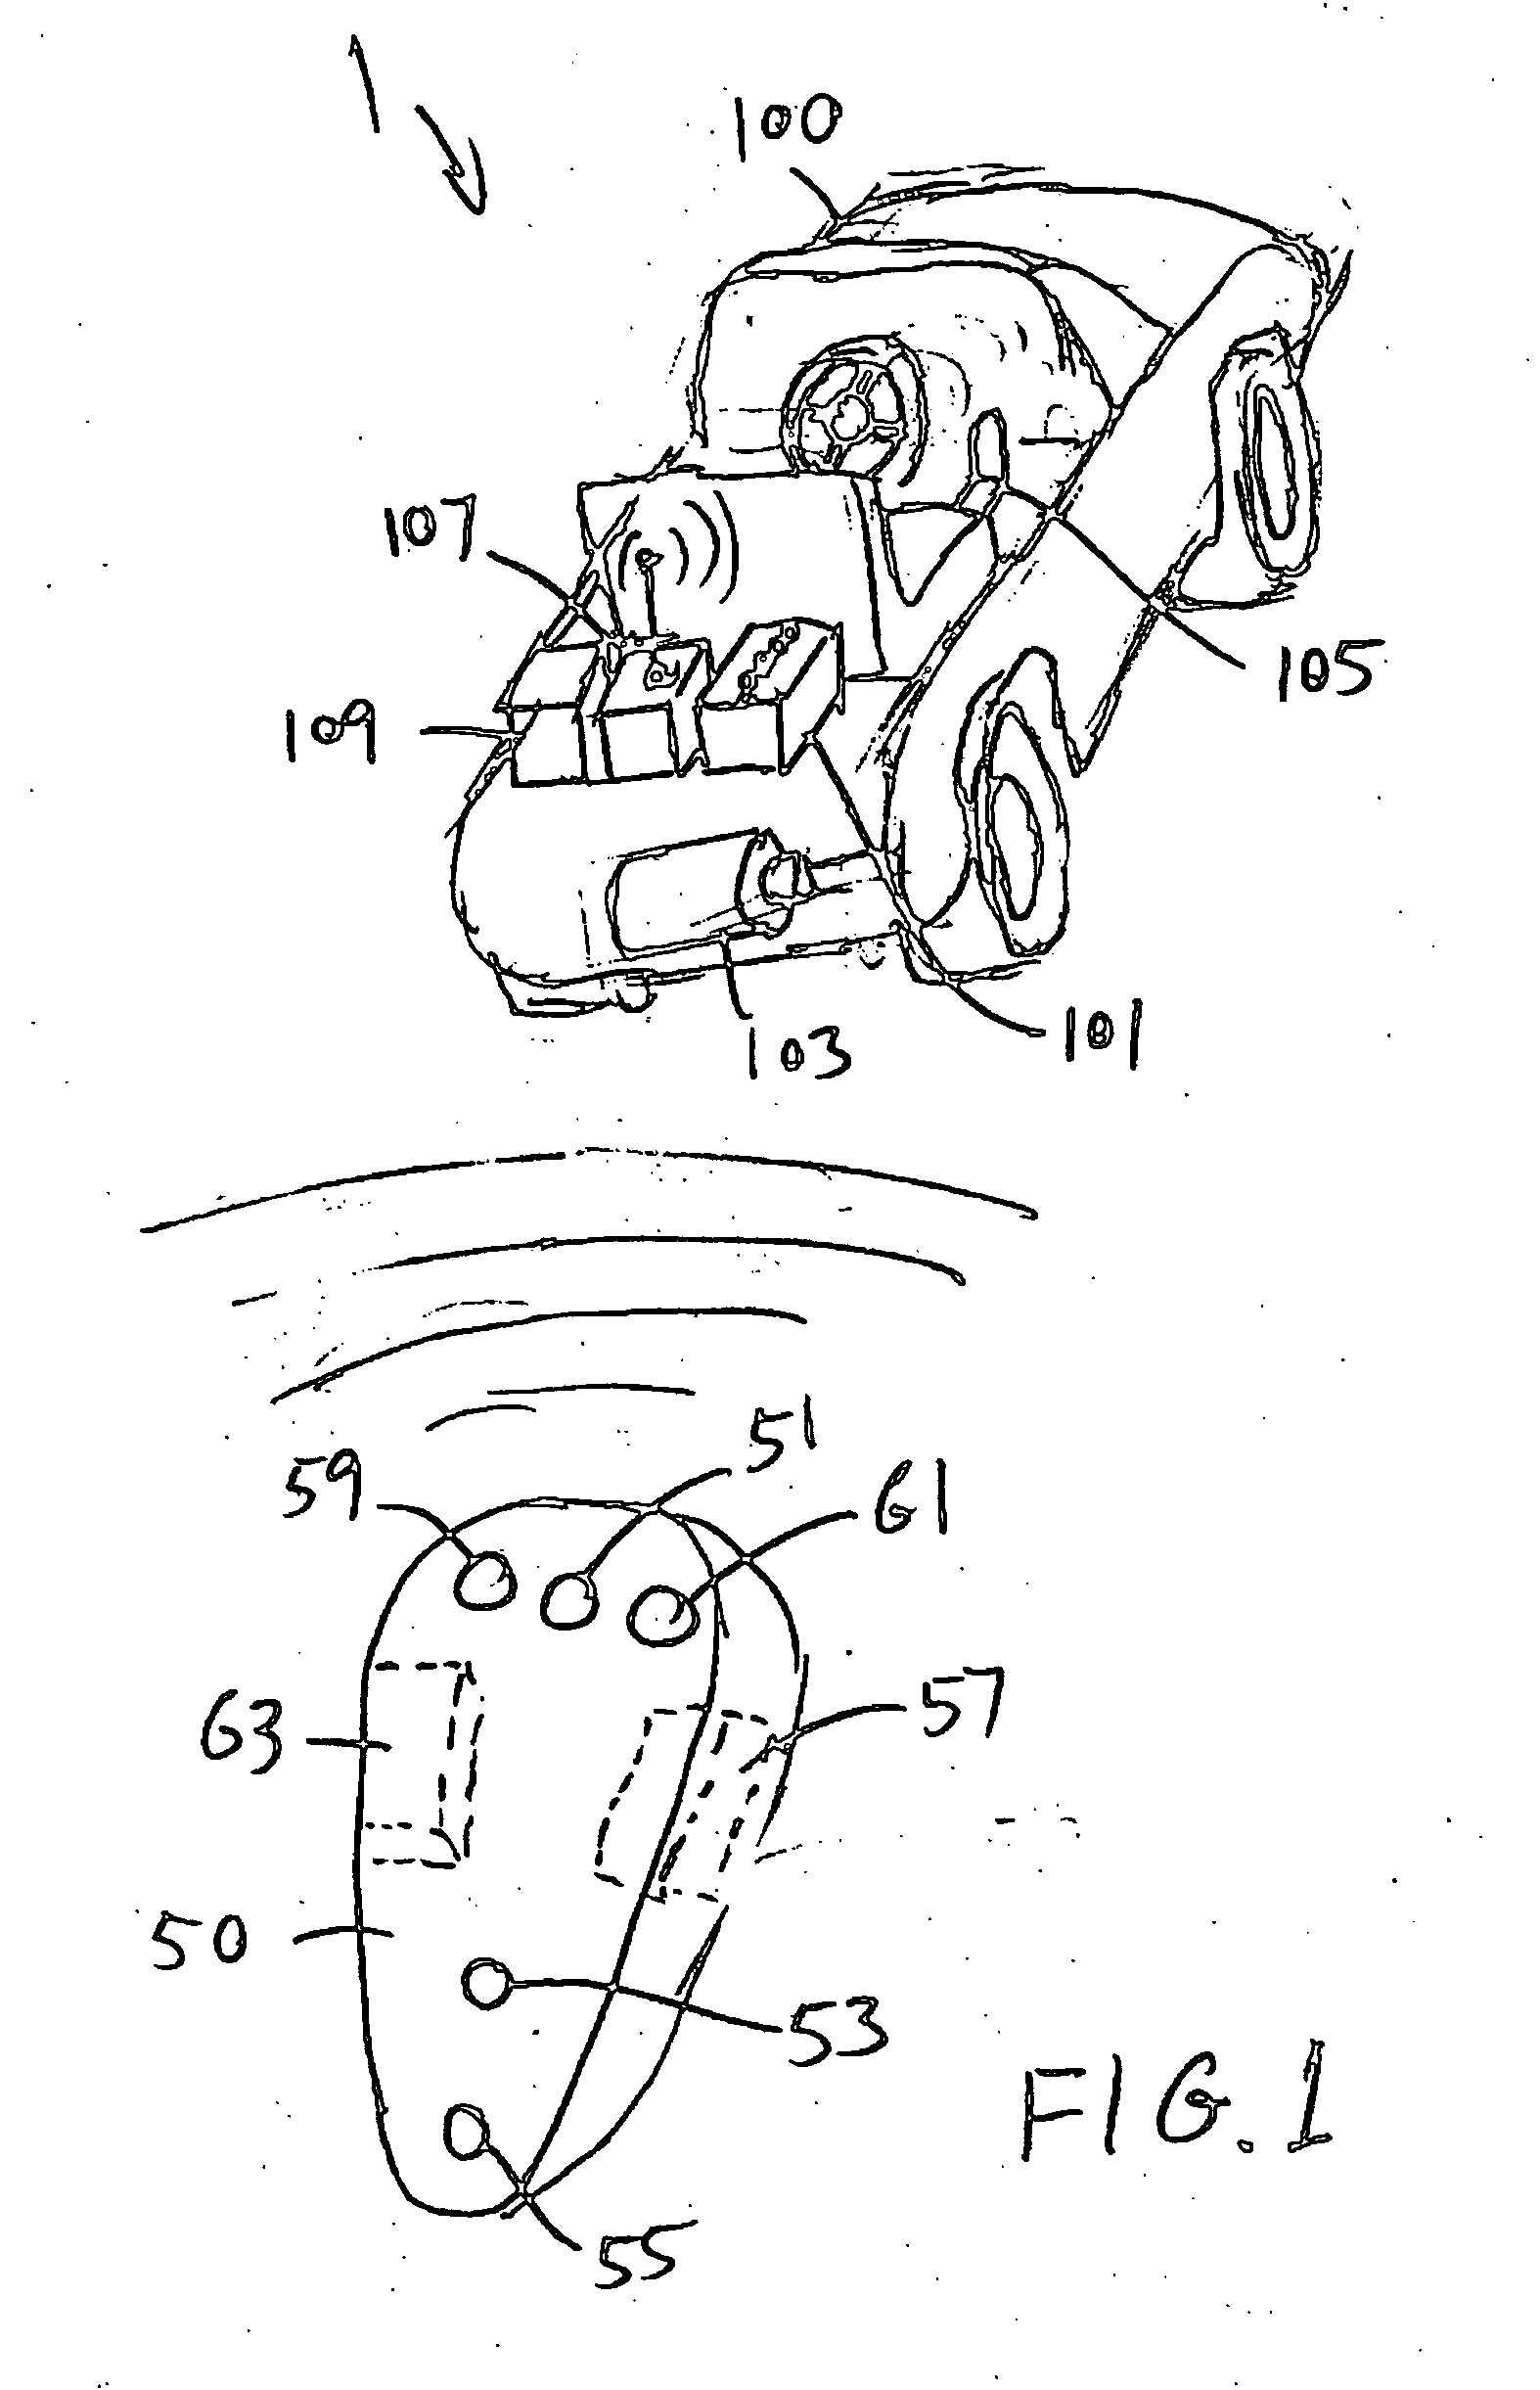 Remote vehicle safety device